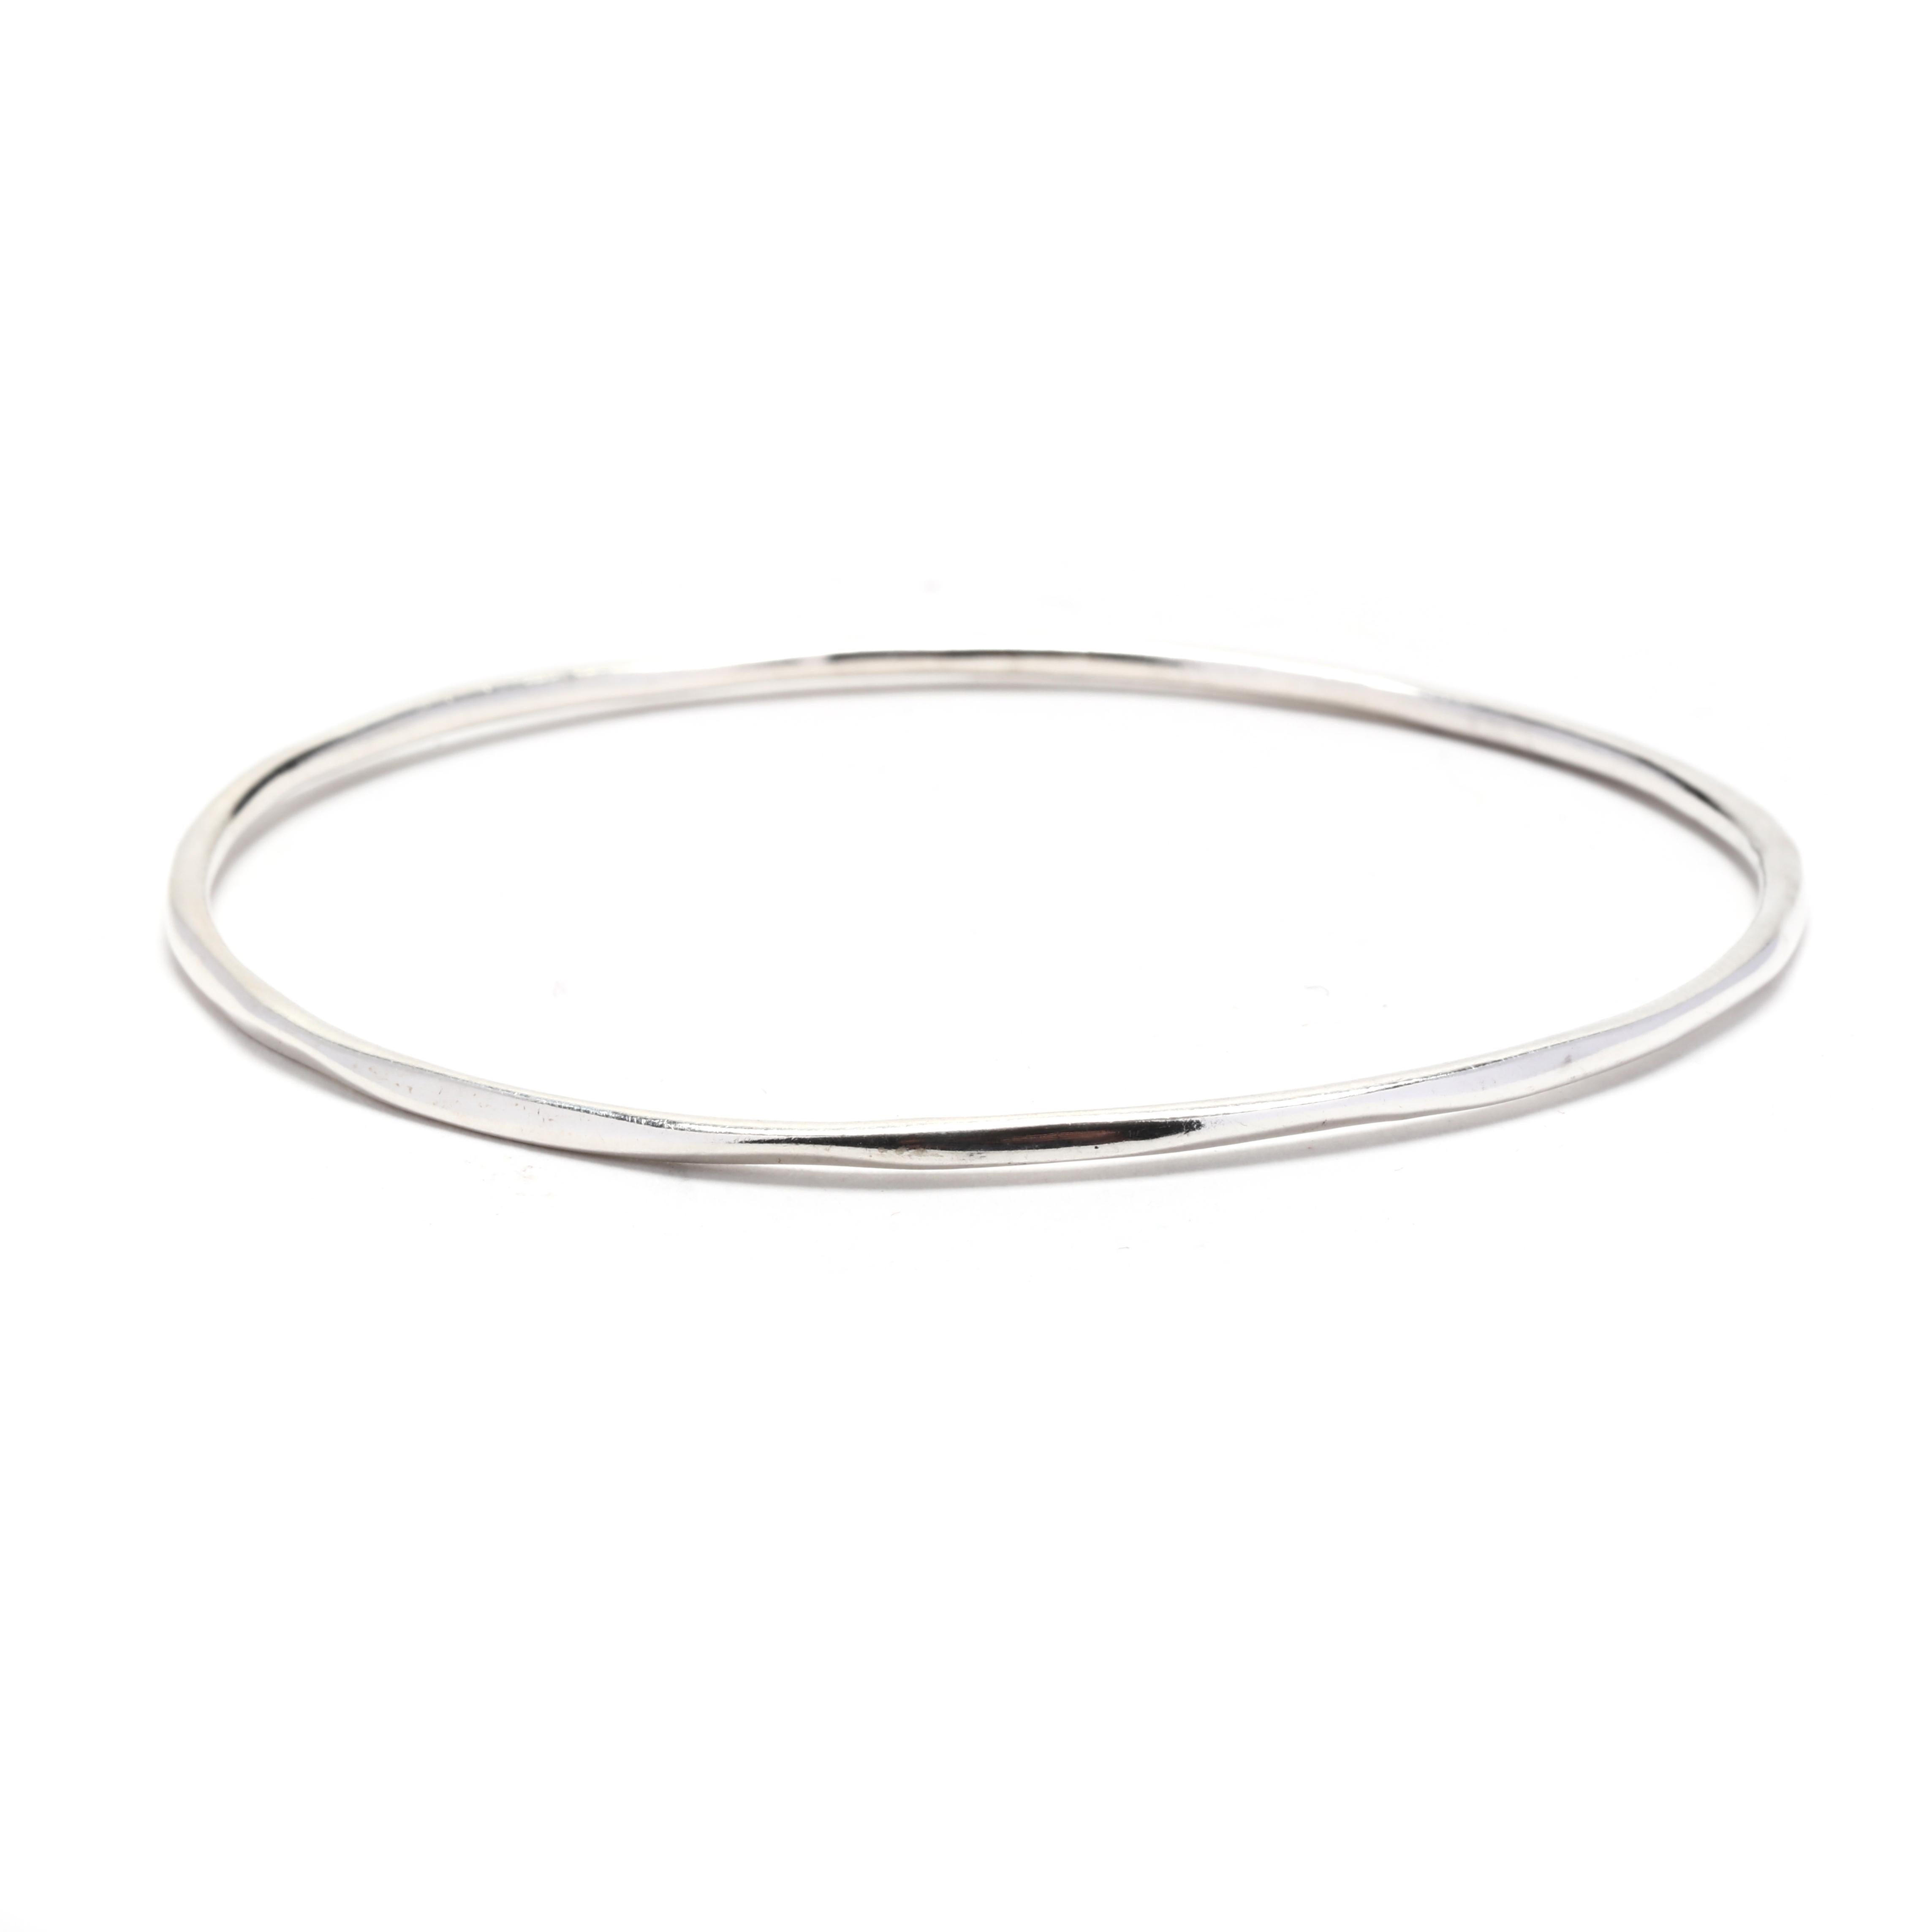 This simple and elegant sterling silver bangle bracelet is the perfect accessory to add a touch of sophistication to any outfit. Made by renowned jewelry brand Ippolita, known for their high-quality craftsmanship, this bracelet is both stylish and